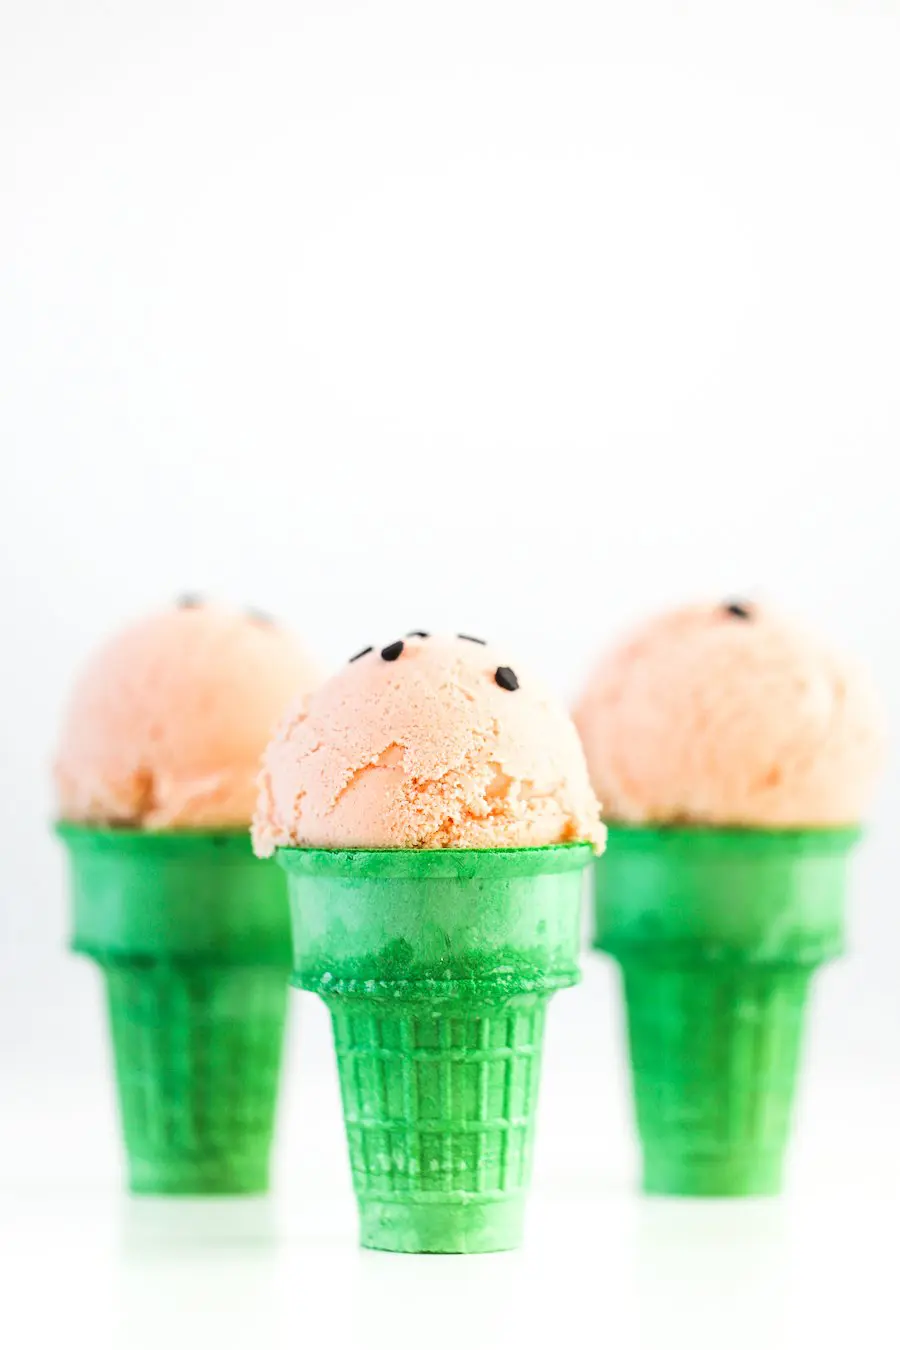 Watermelon Ice Cream with Candy "Seeds" in Ice Cream Cones